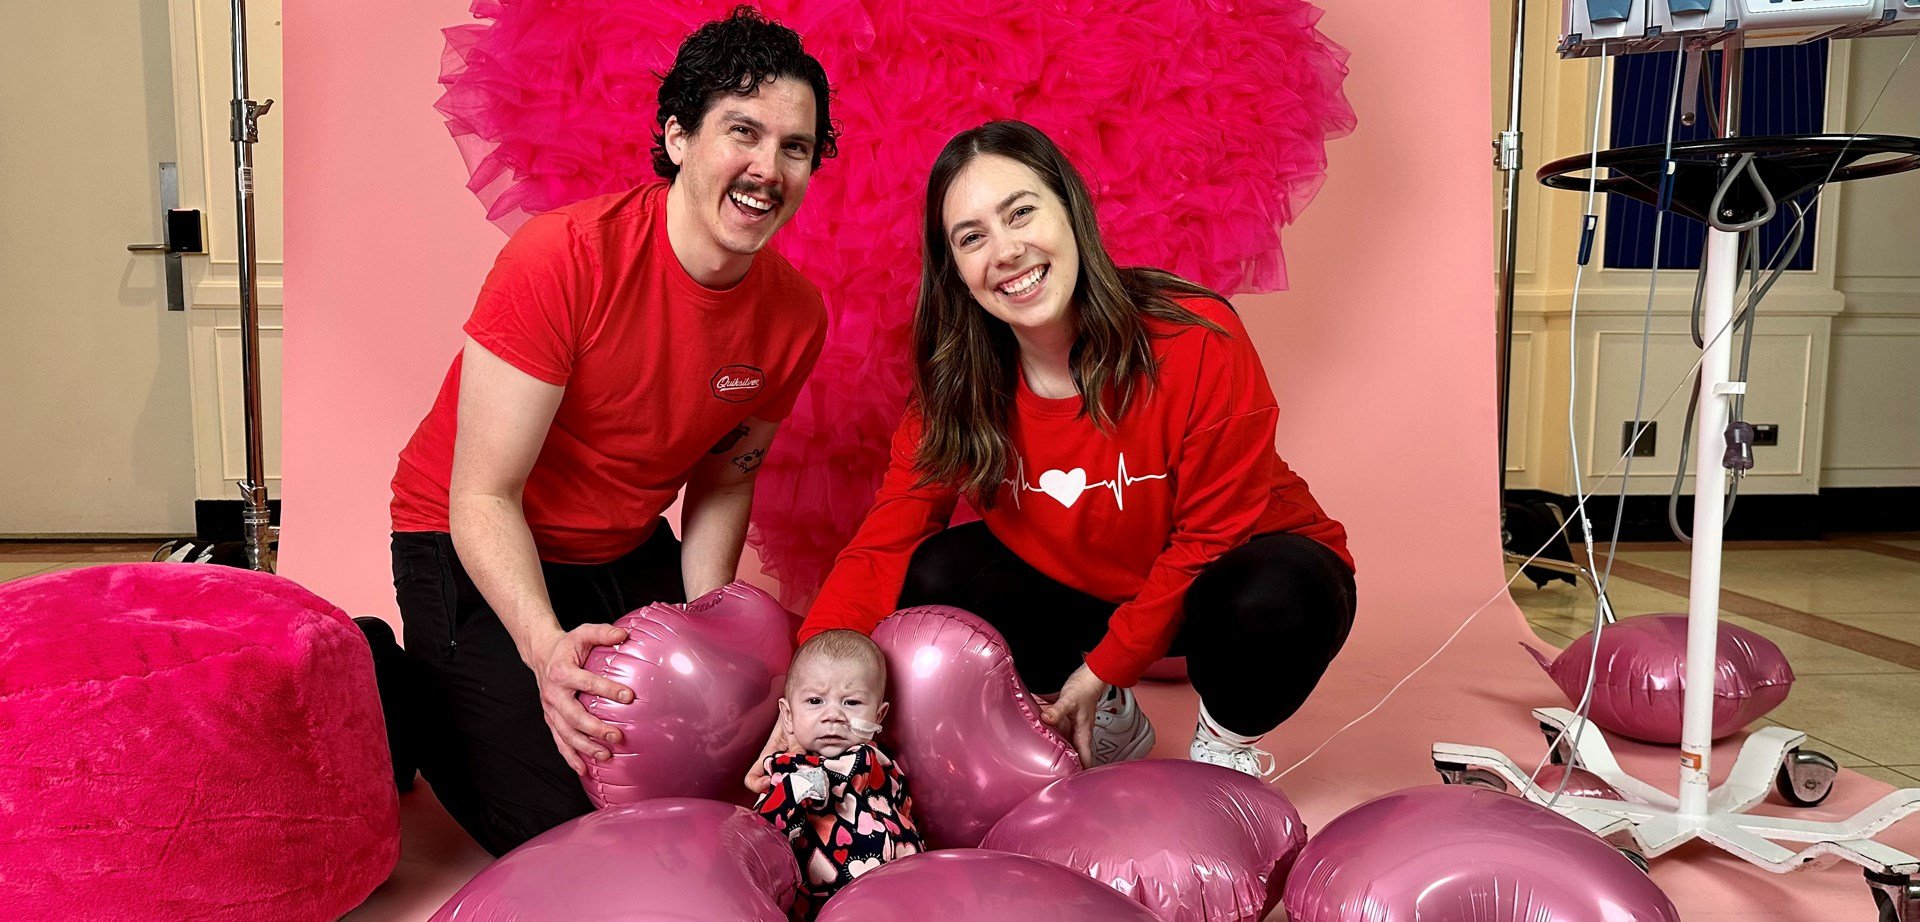 A man and a woman dressed in red T-shirts posing with their baby in front of a heart backdrop and pink heart balloons on the floor.